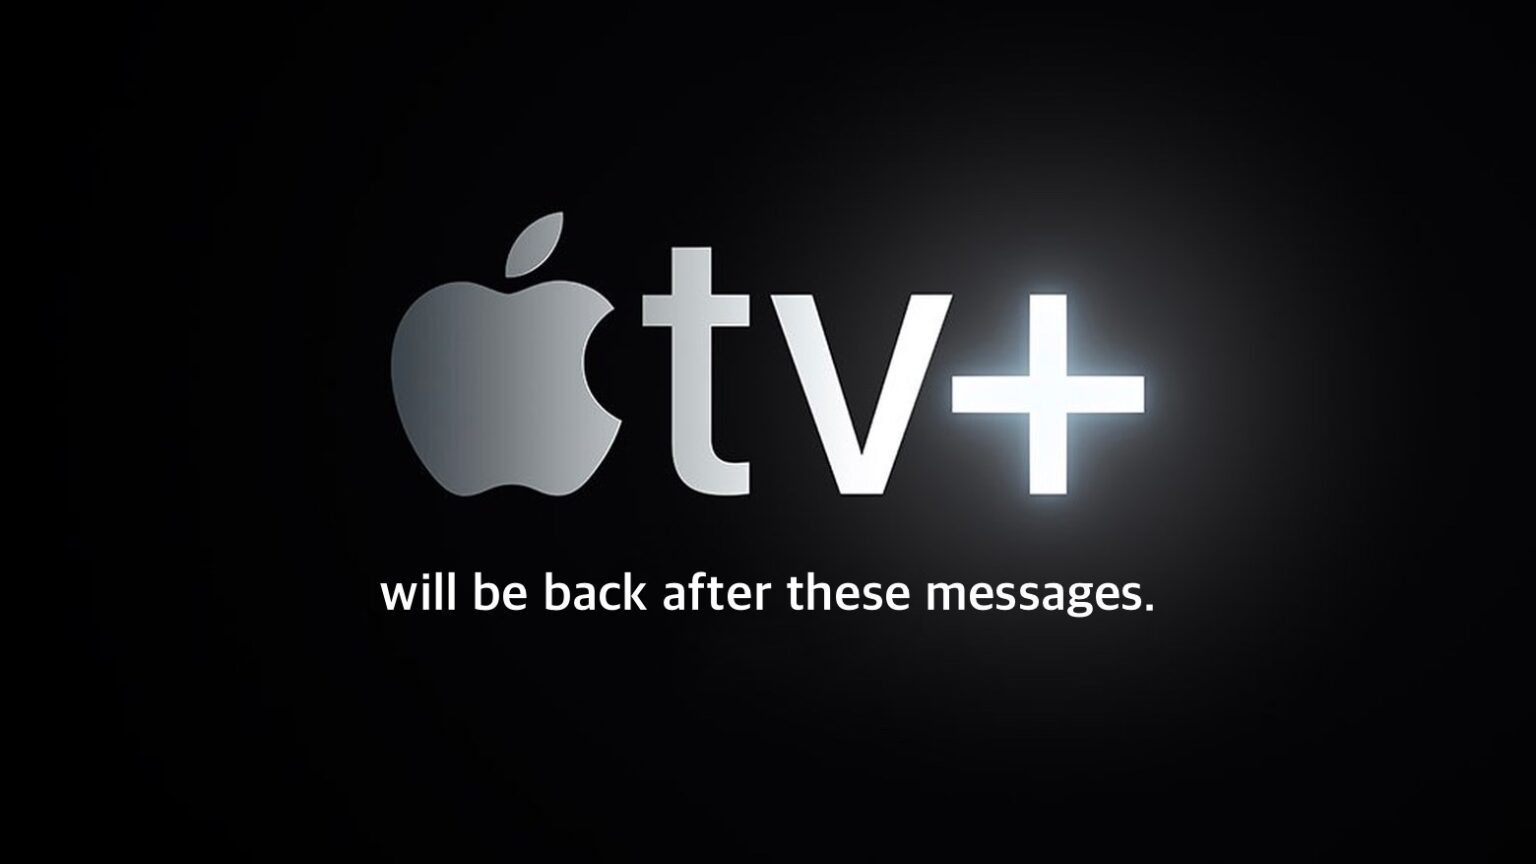 Ads might come to Apple TV+